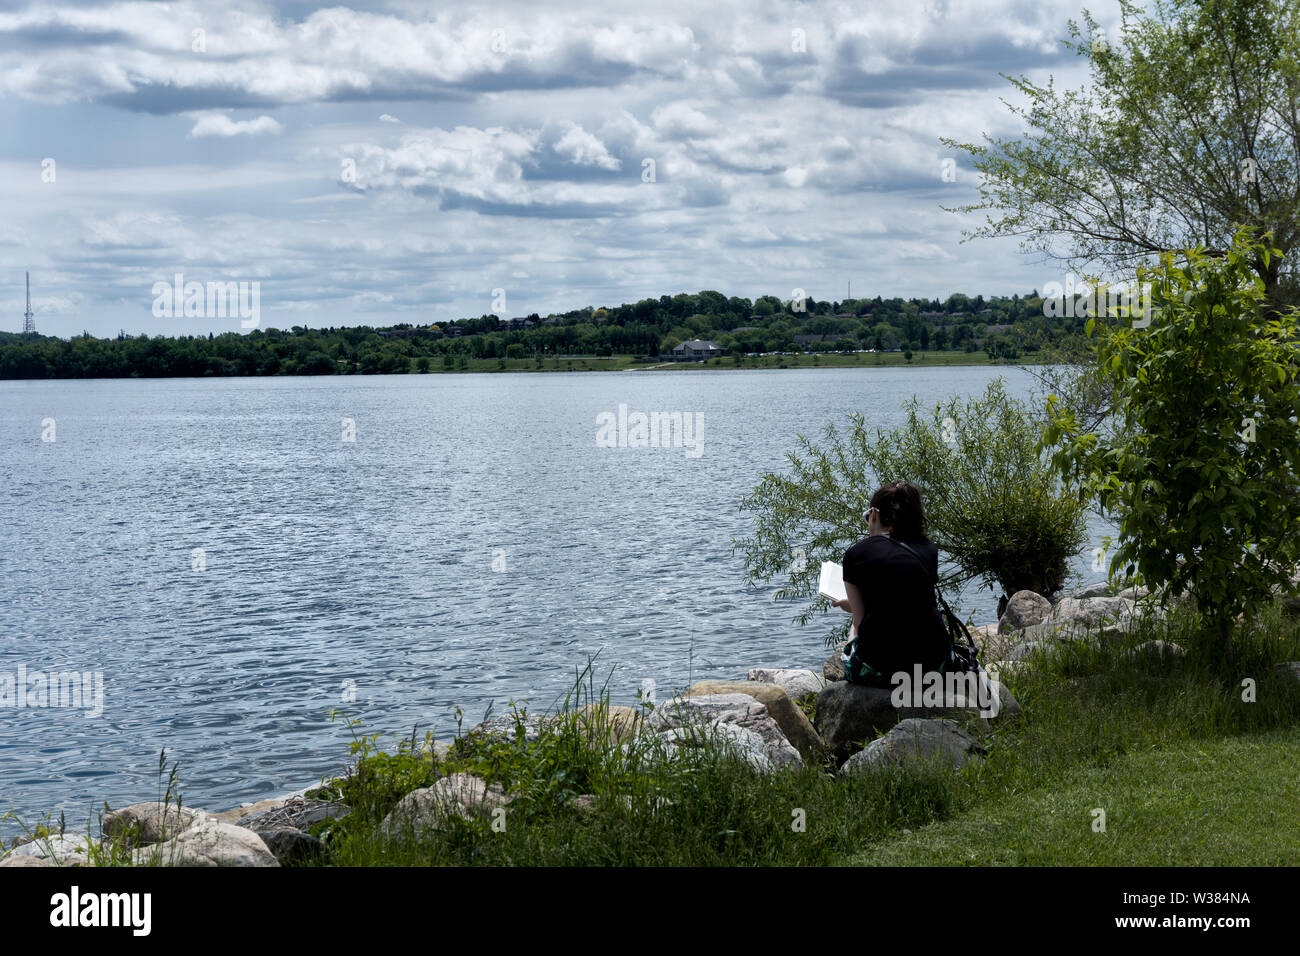 Canada Ontario Barrie at June 2019, Lunch break in the park, a woman is reading Stock Photo